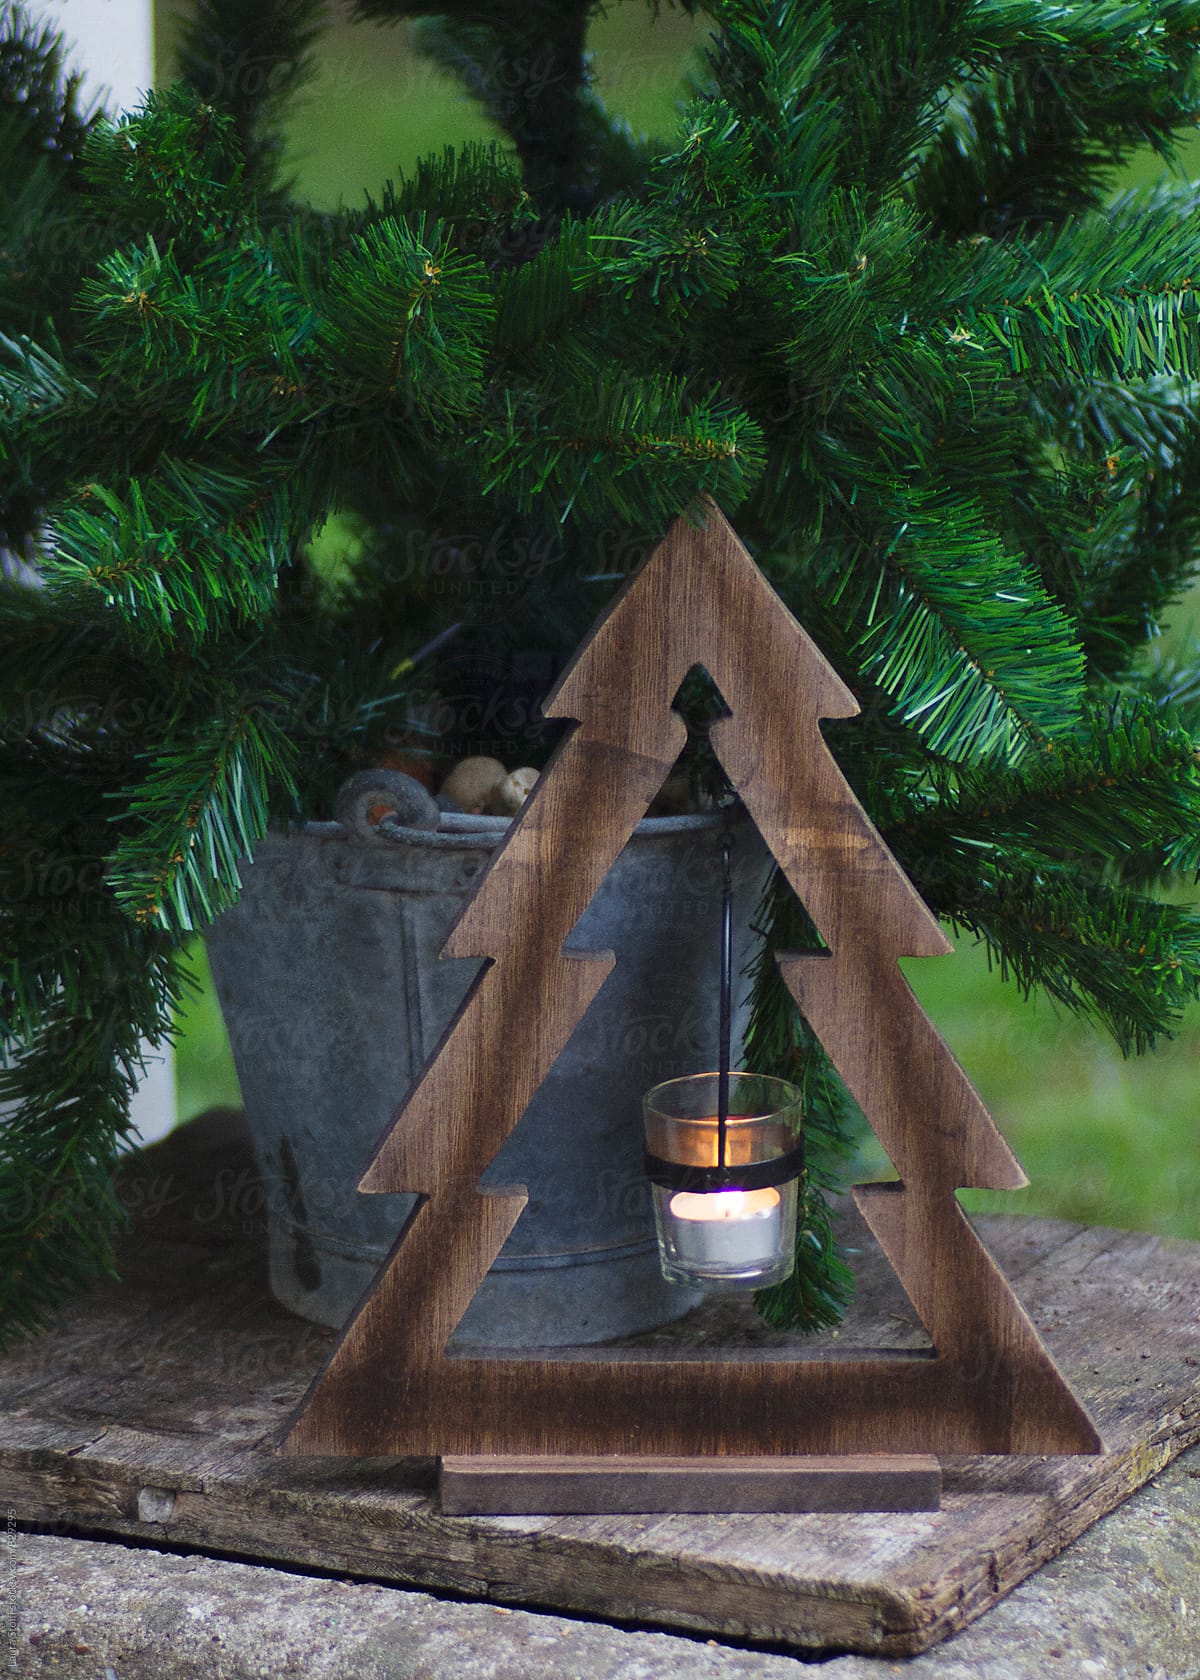 Christmas tree shaped wooden candle holder close to spruce tree in garden